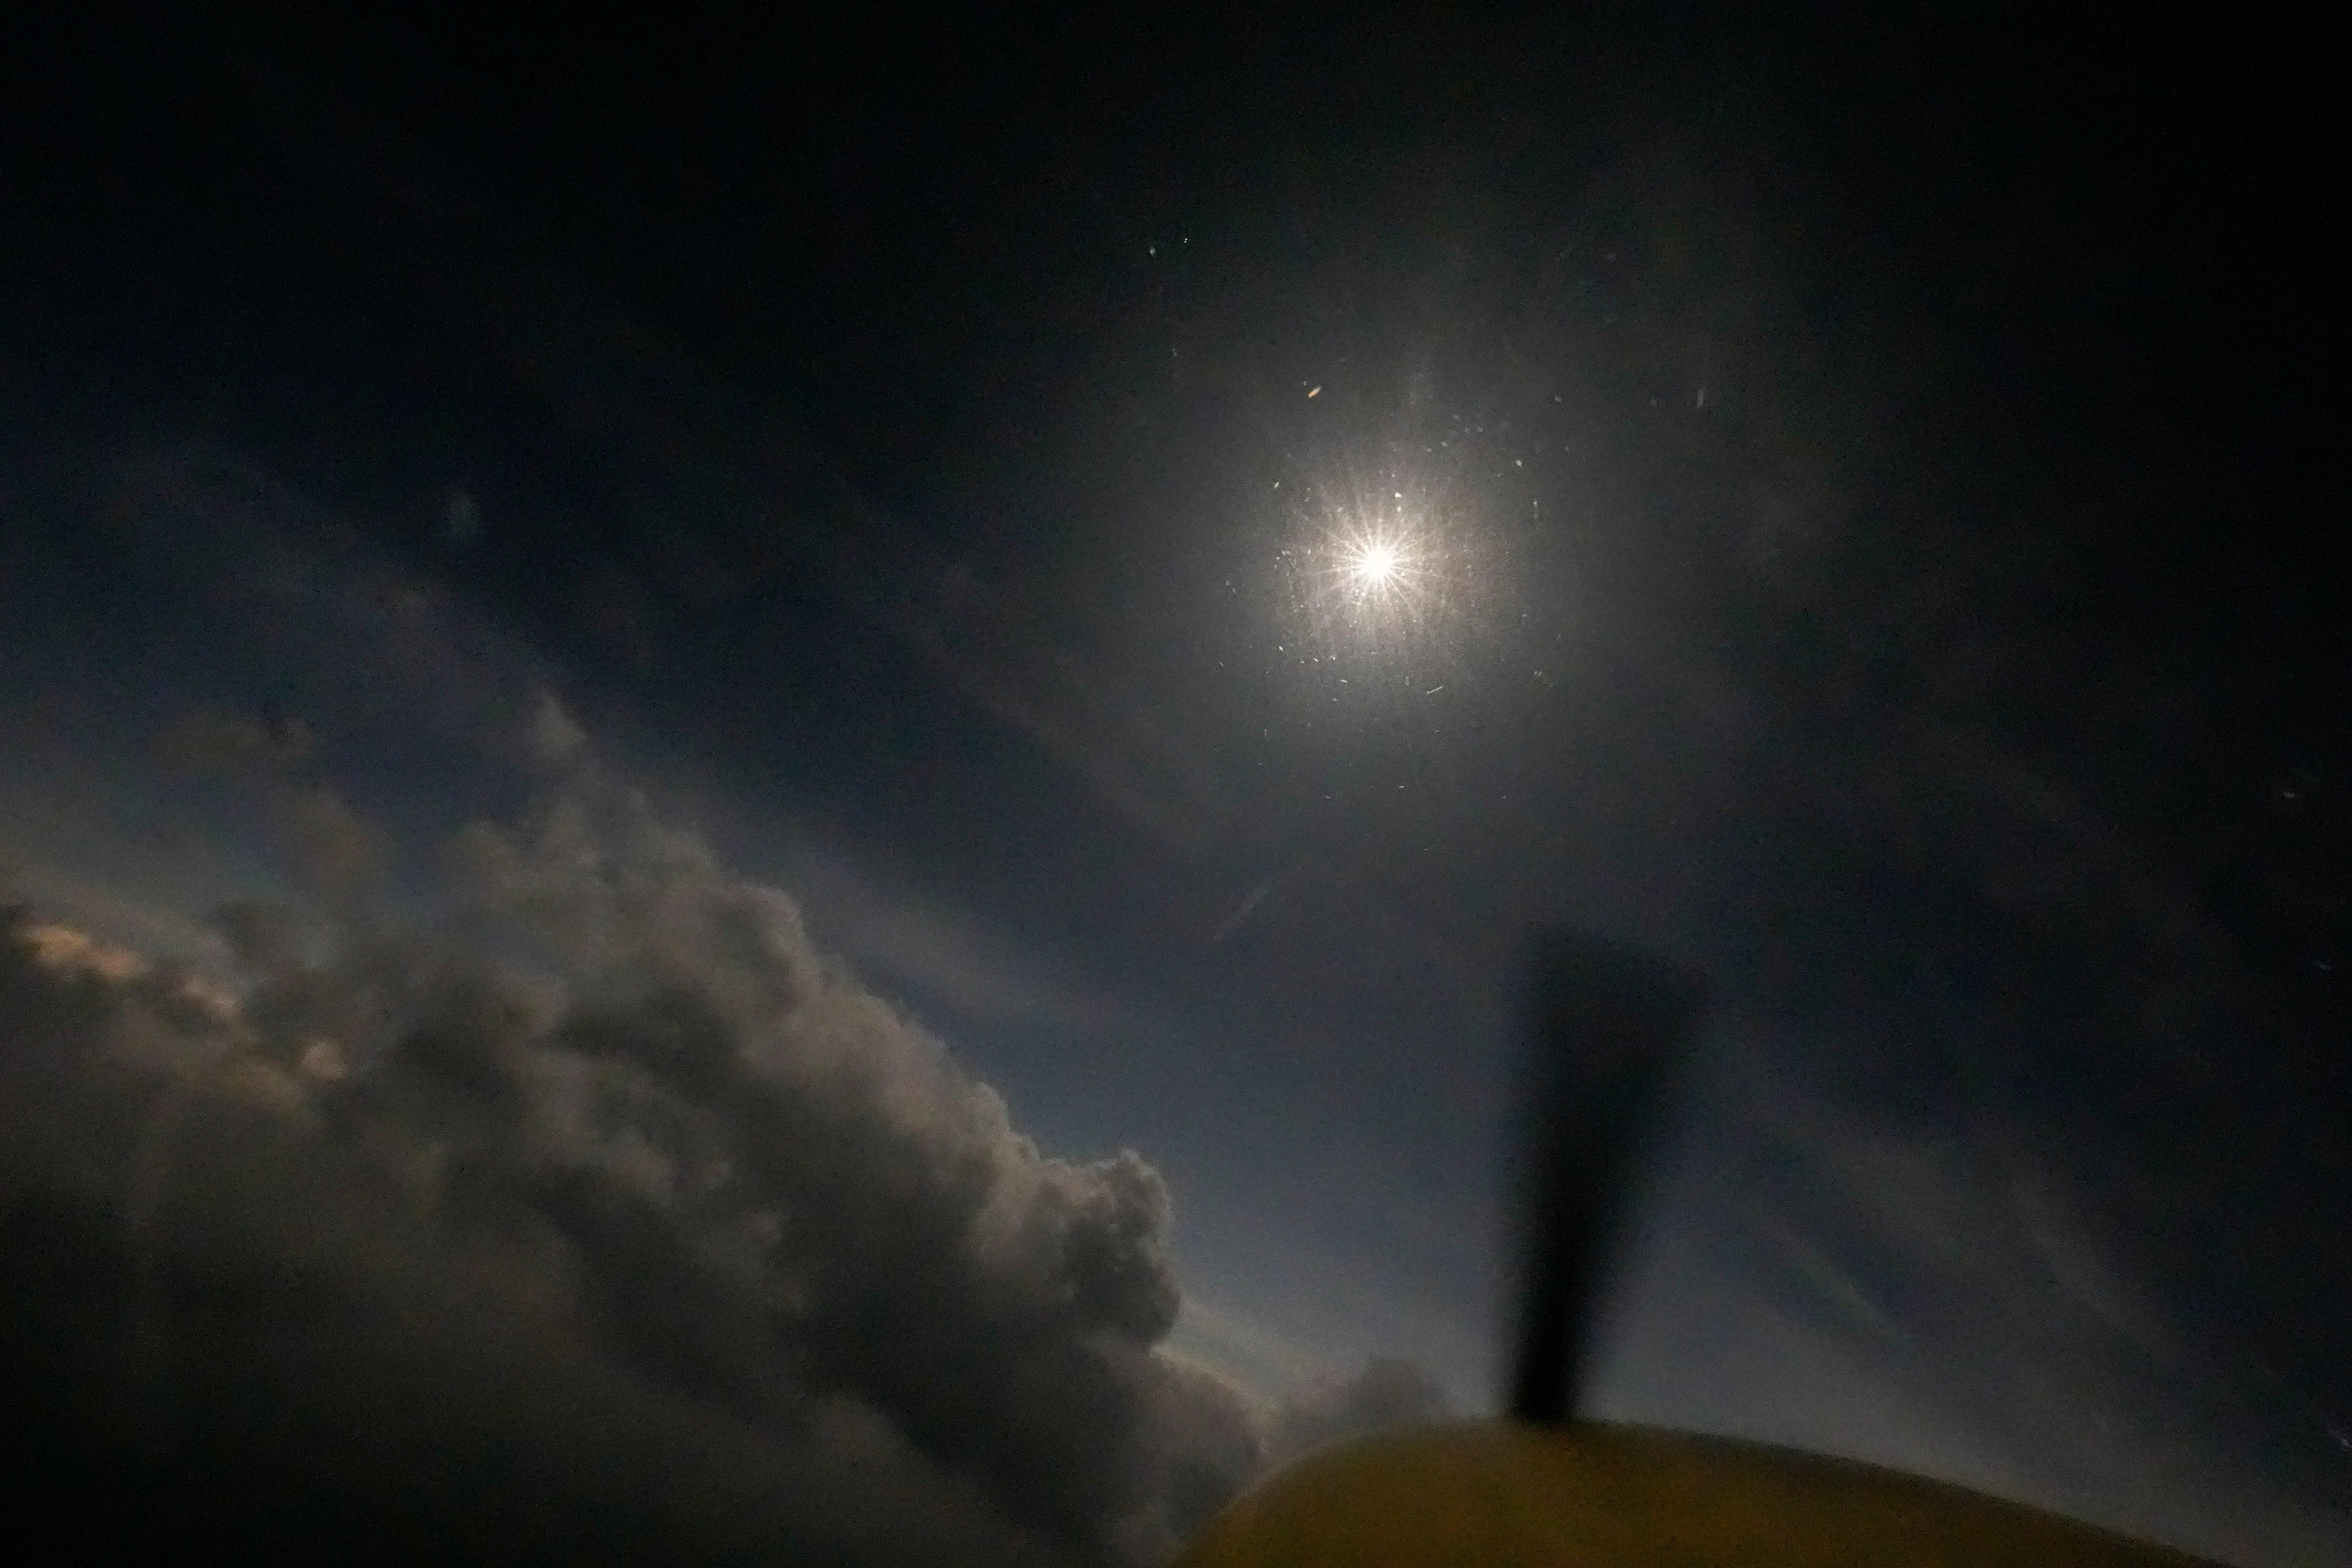 A nighttime sky unfolds in the afternoon as the moon partially covers the sun during a total solar eclipse, as seen from the air in a Cessna 172 aircraft, at about 5,000 ft., over in Arkadelphia, Ark., within the path of totality